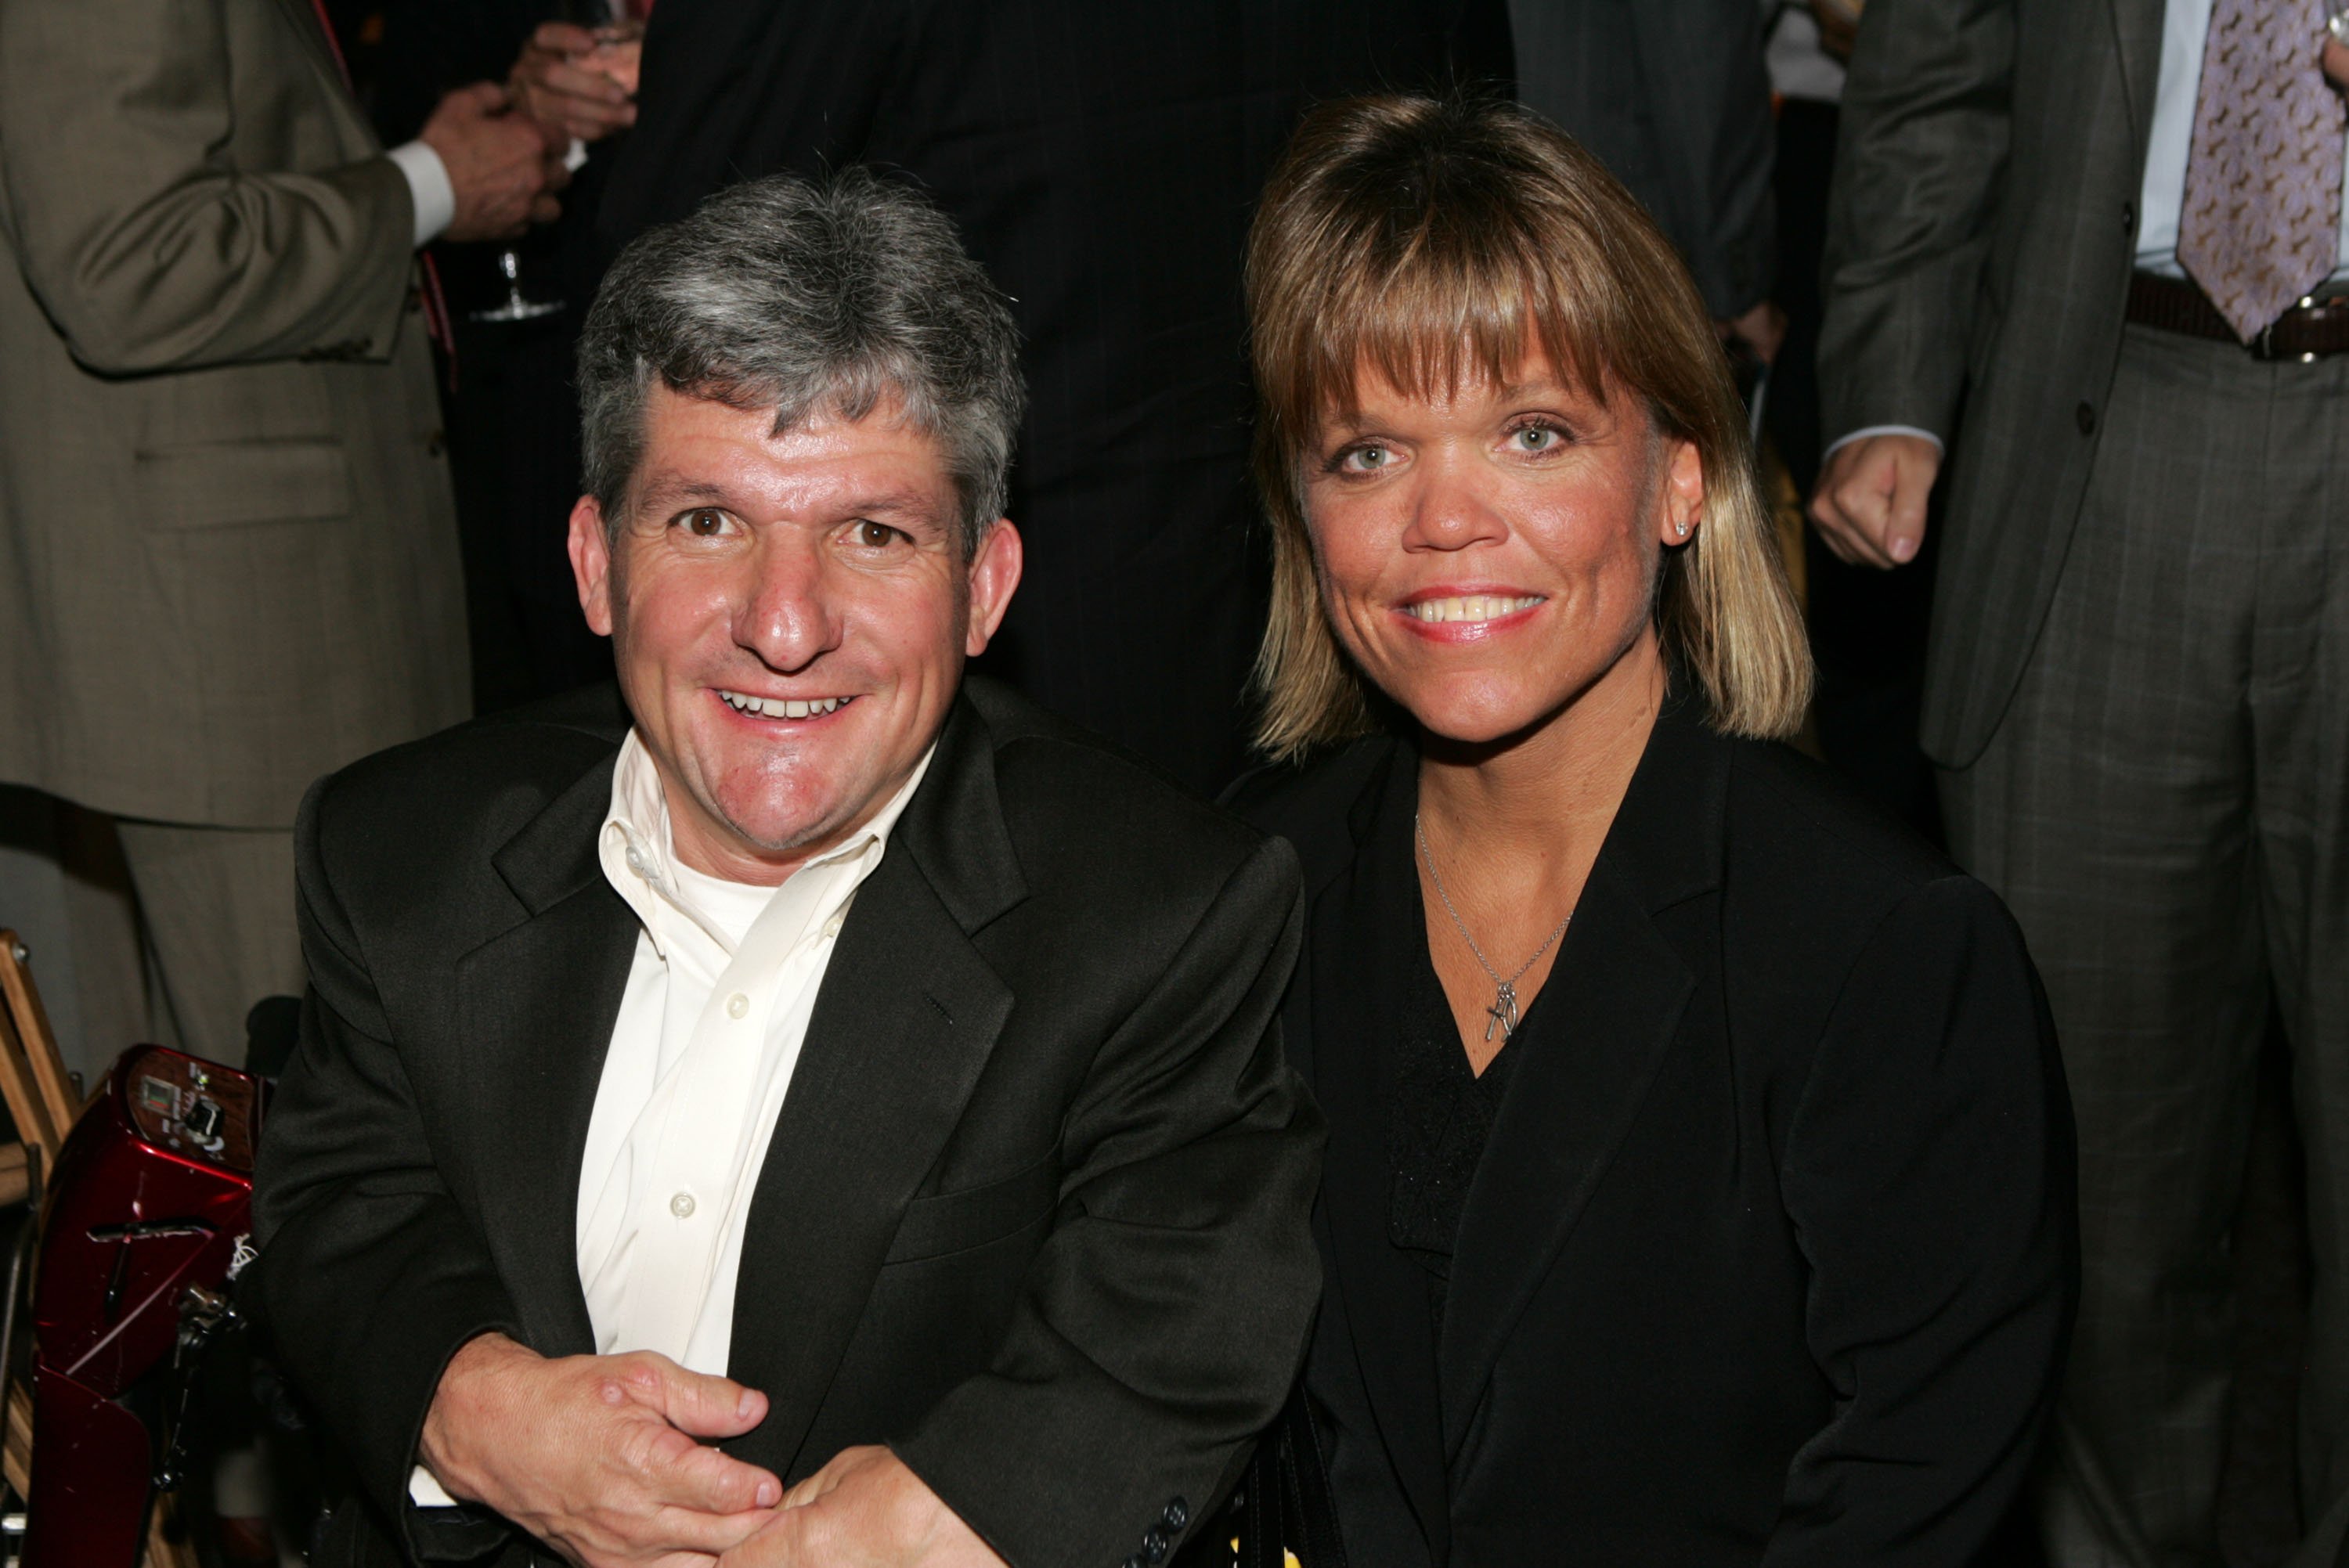 Matt and Amy Roloff  attends the Discovery Upfront Presentation in New York City on April 23, 2008 | Photo: Getty Images